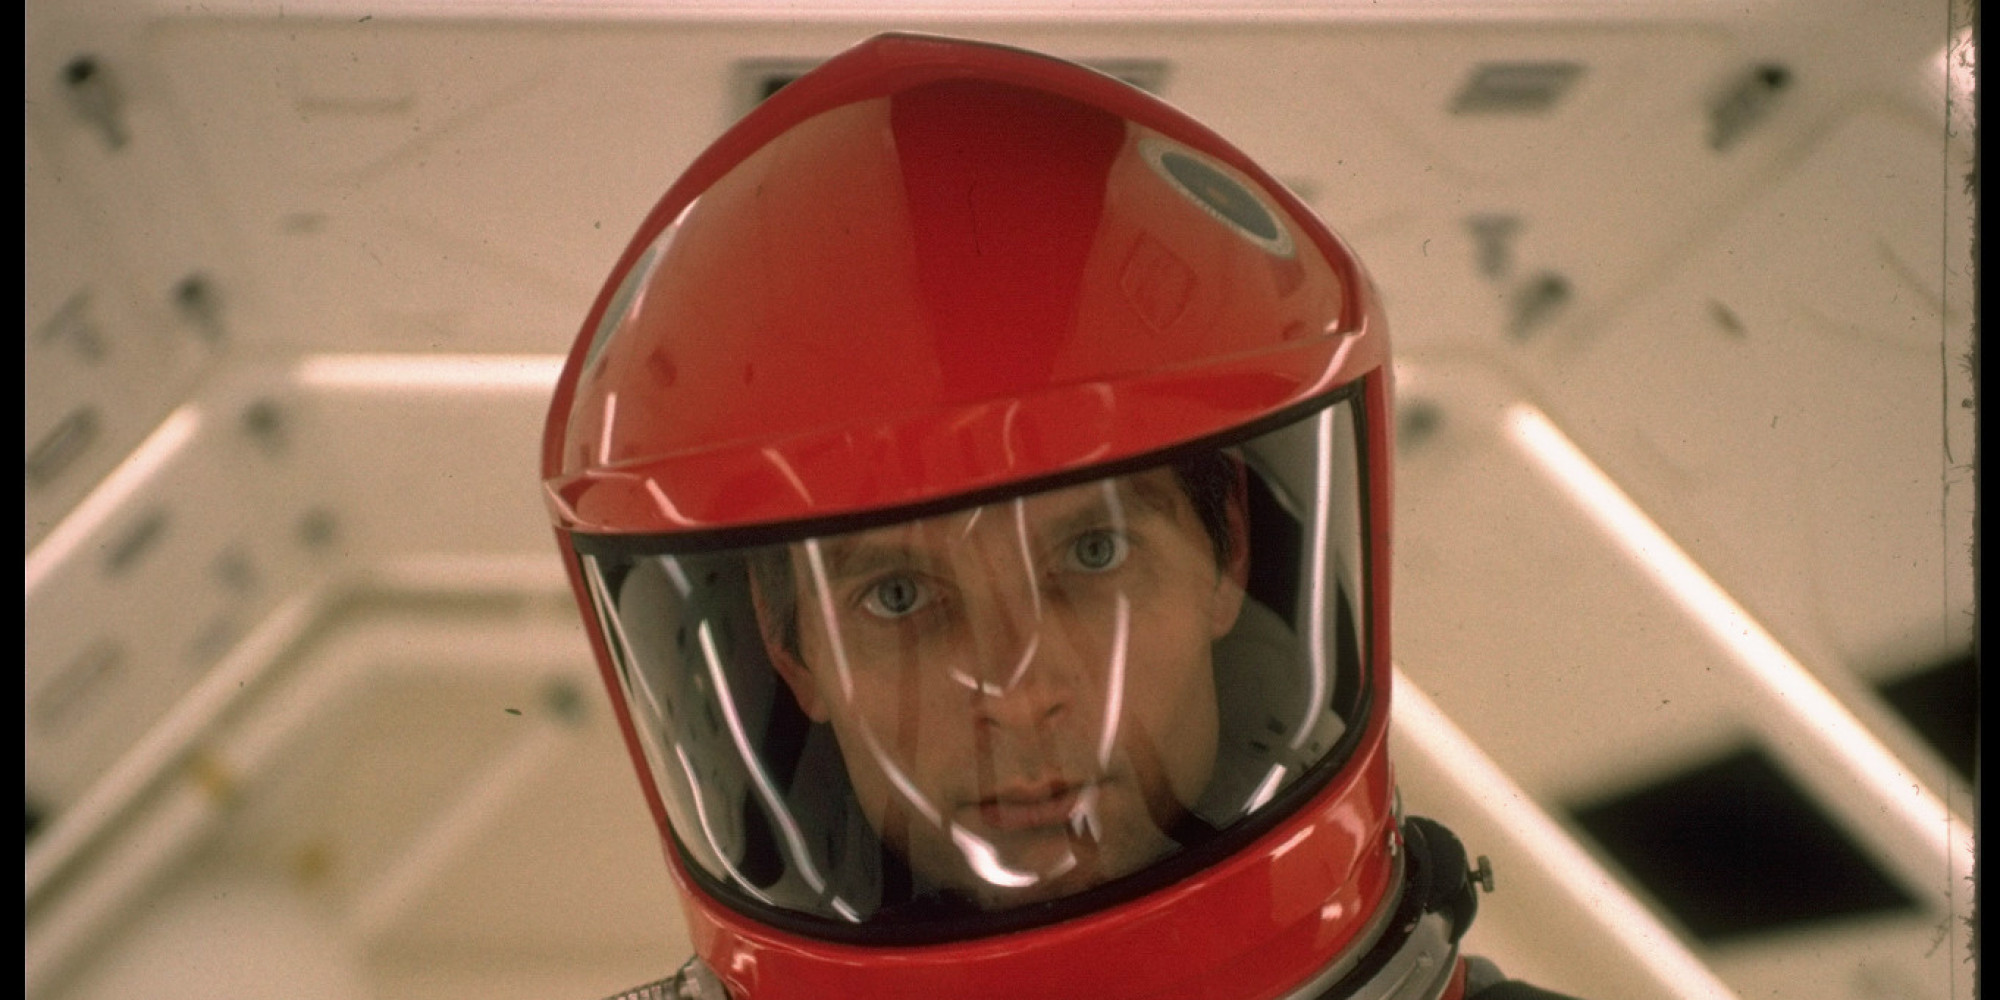 Actor Keir Dullea in space suit in scene from motion picture 2001: A Space Odyssey.  (Photo by Dmitri Kessel//Time Life Pictures/Getty Images)